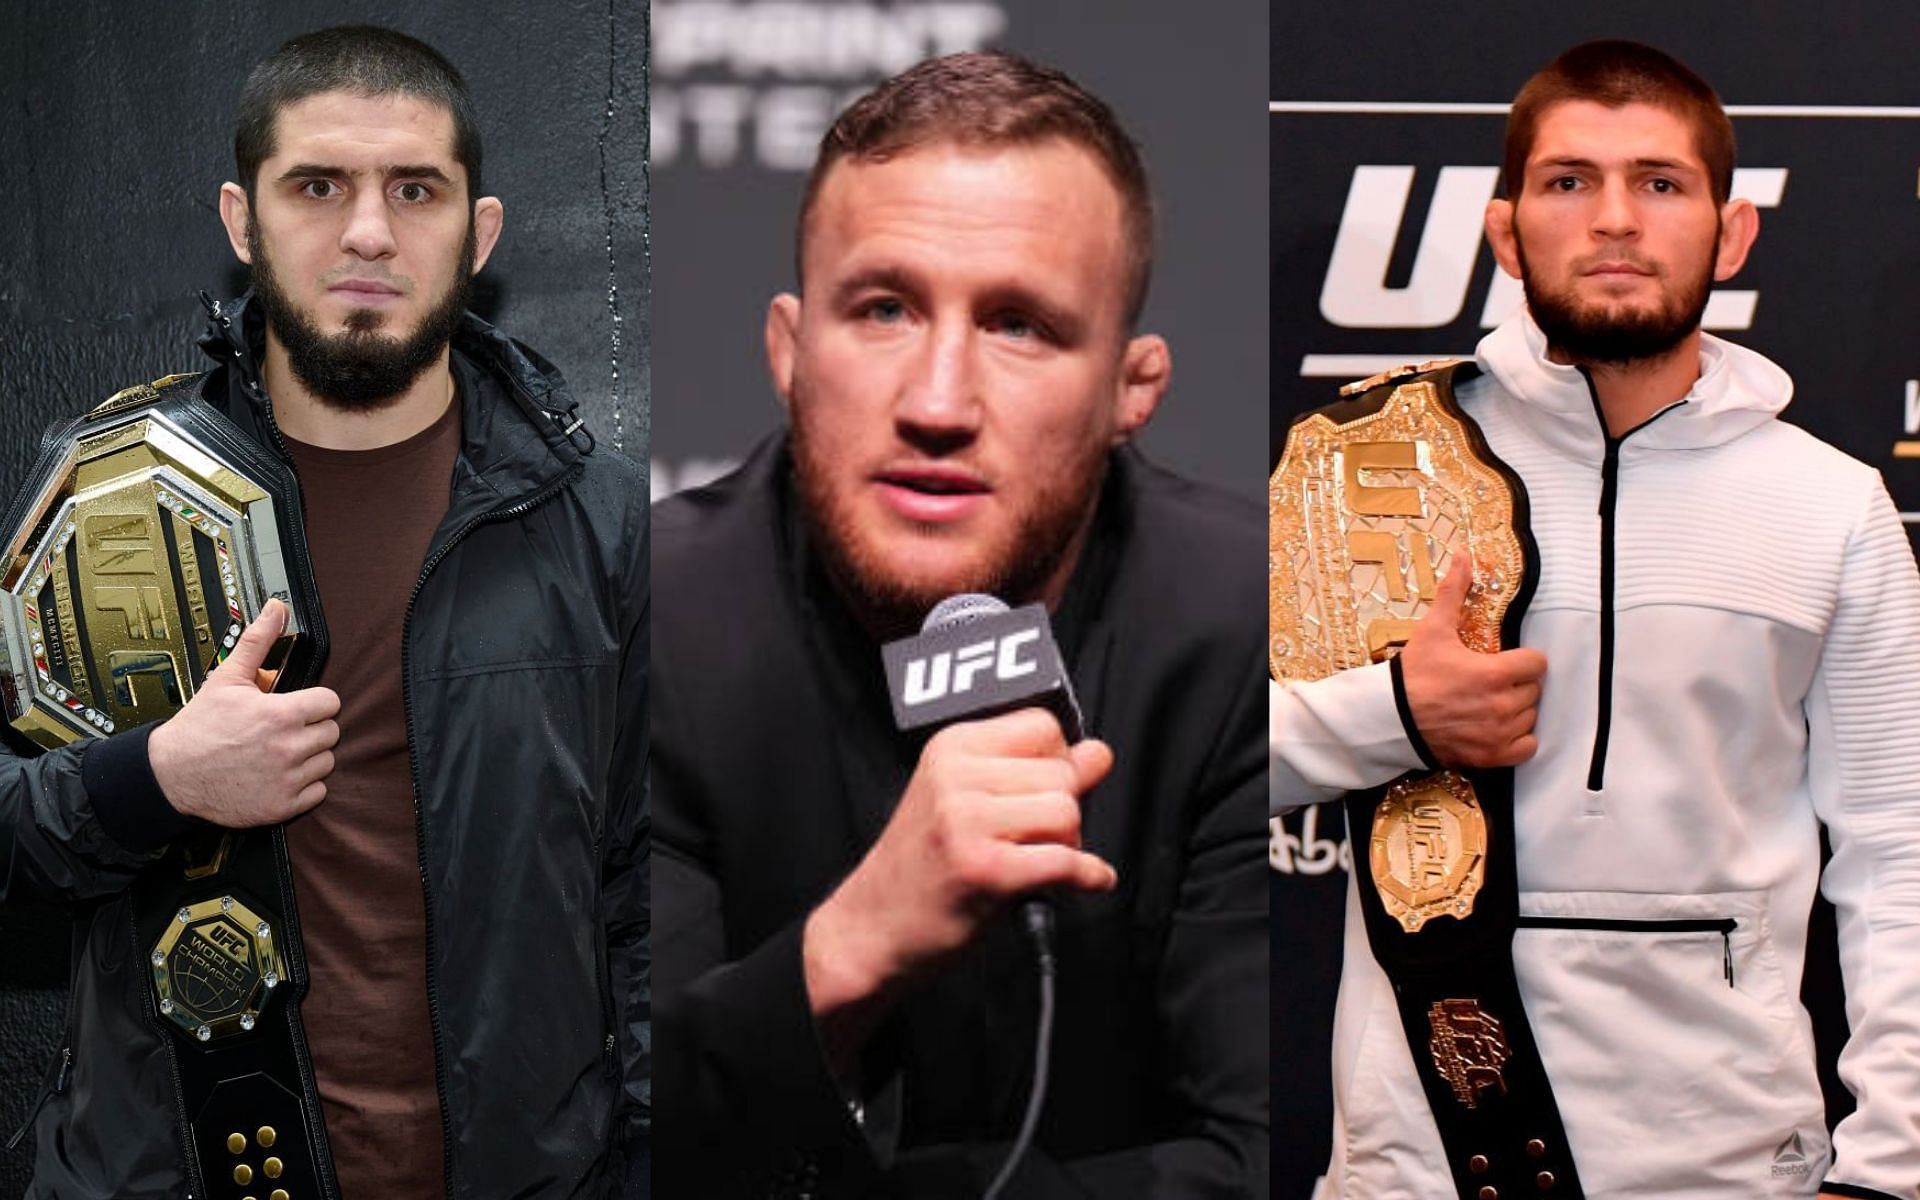 Difference between Islam Makhachev and Khabib Nurmagomedov explained by Justin Gaethje